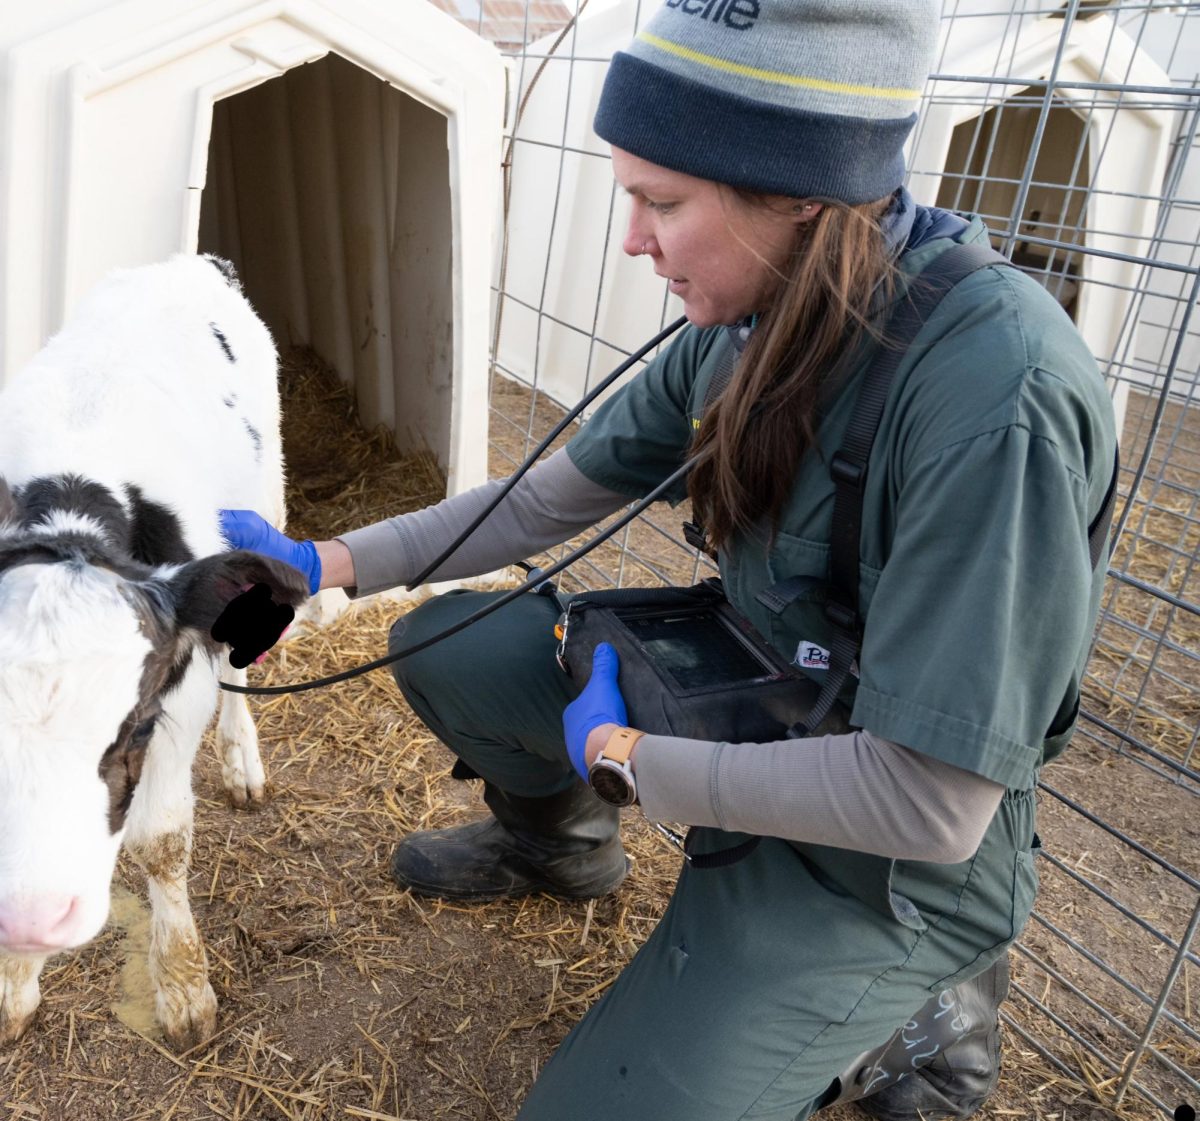 In an animal pen, a scientist wearing latex gloves and a harness carrying a medical device crouches next to a baby cow, feeling the calfs side with their right hand.